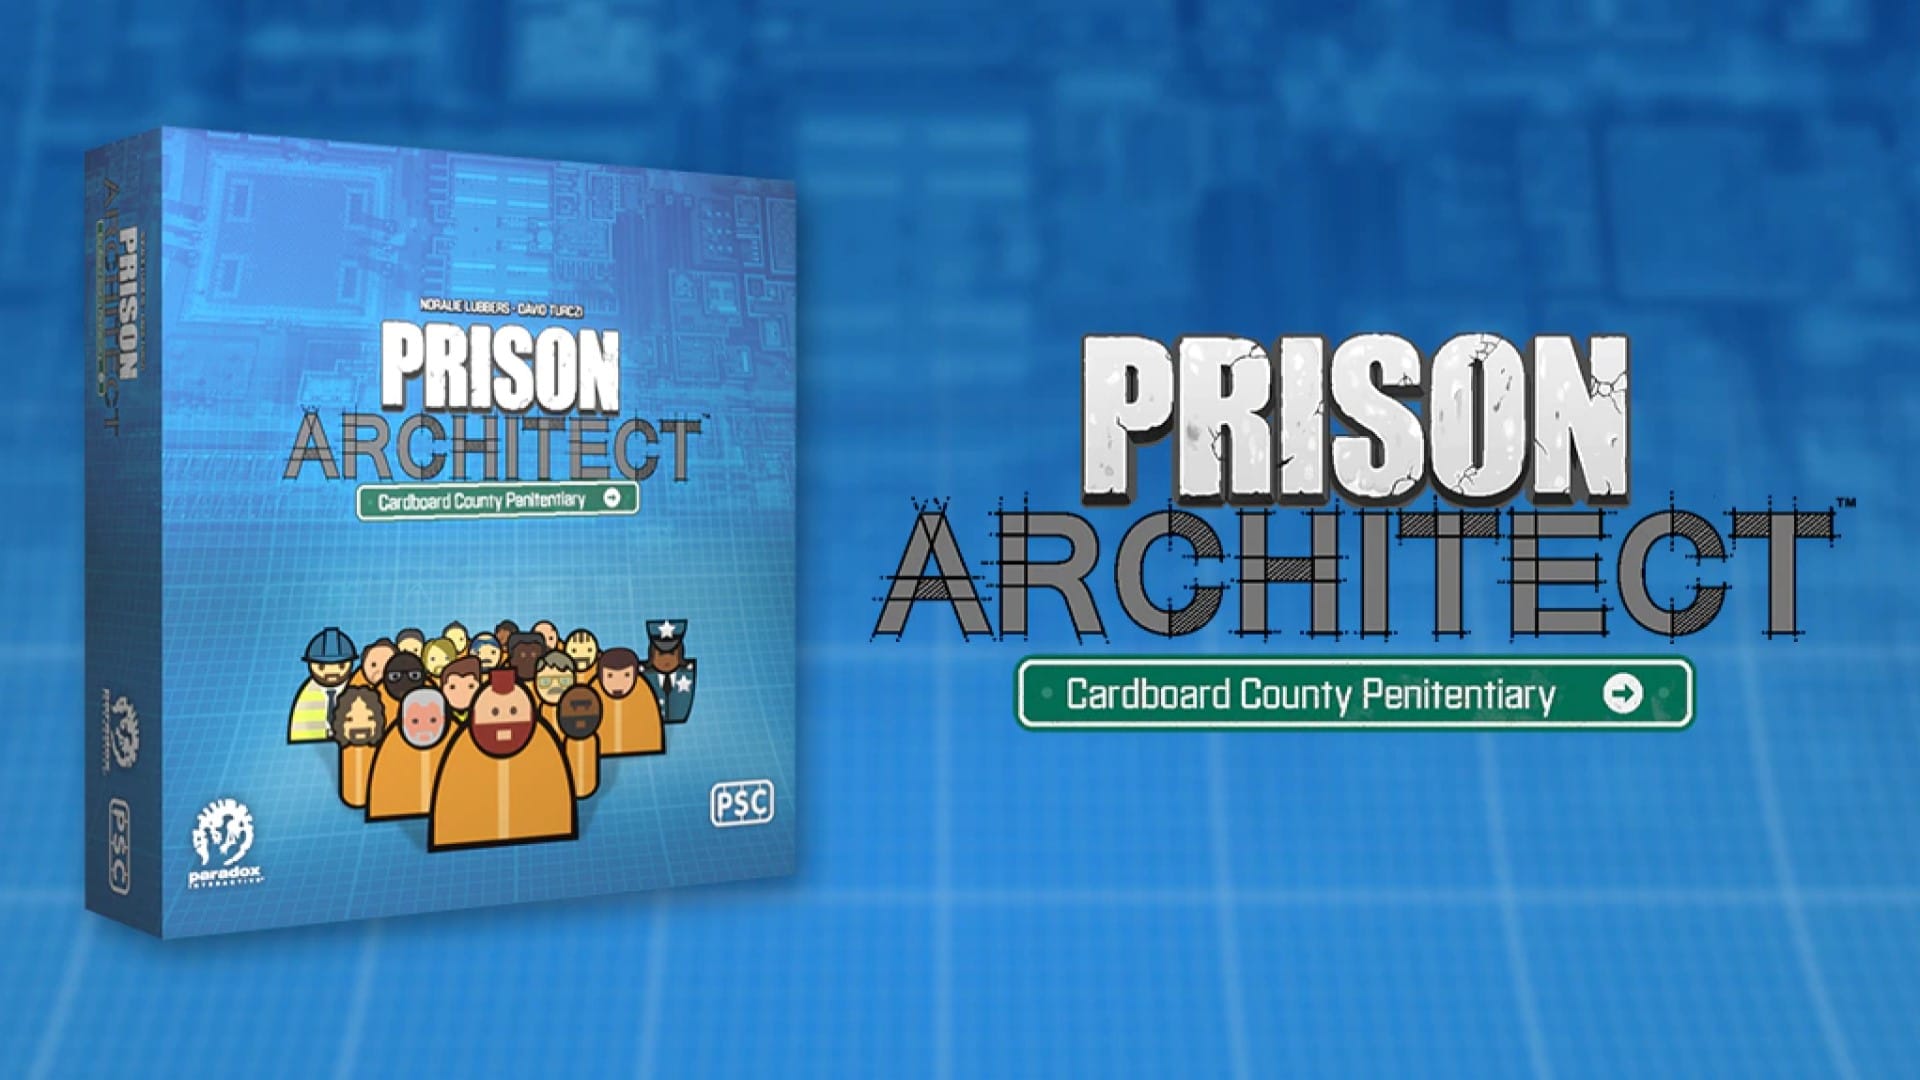 The official press image of the Prison Architect Board Game Kickstarter